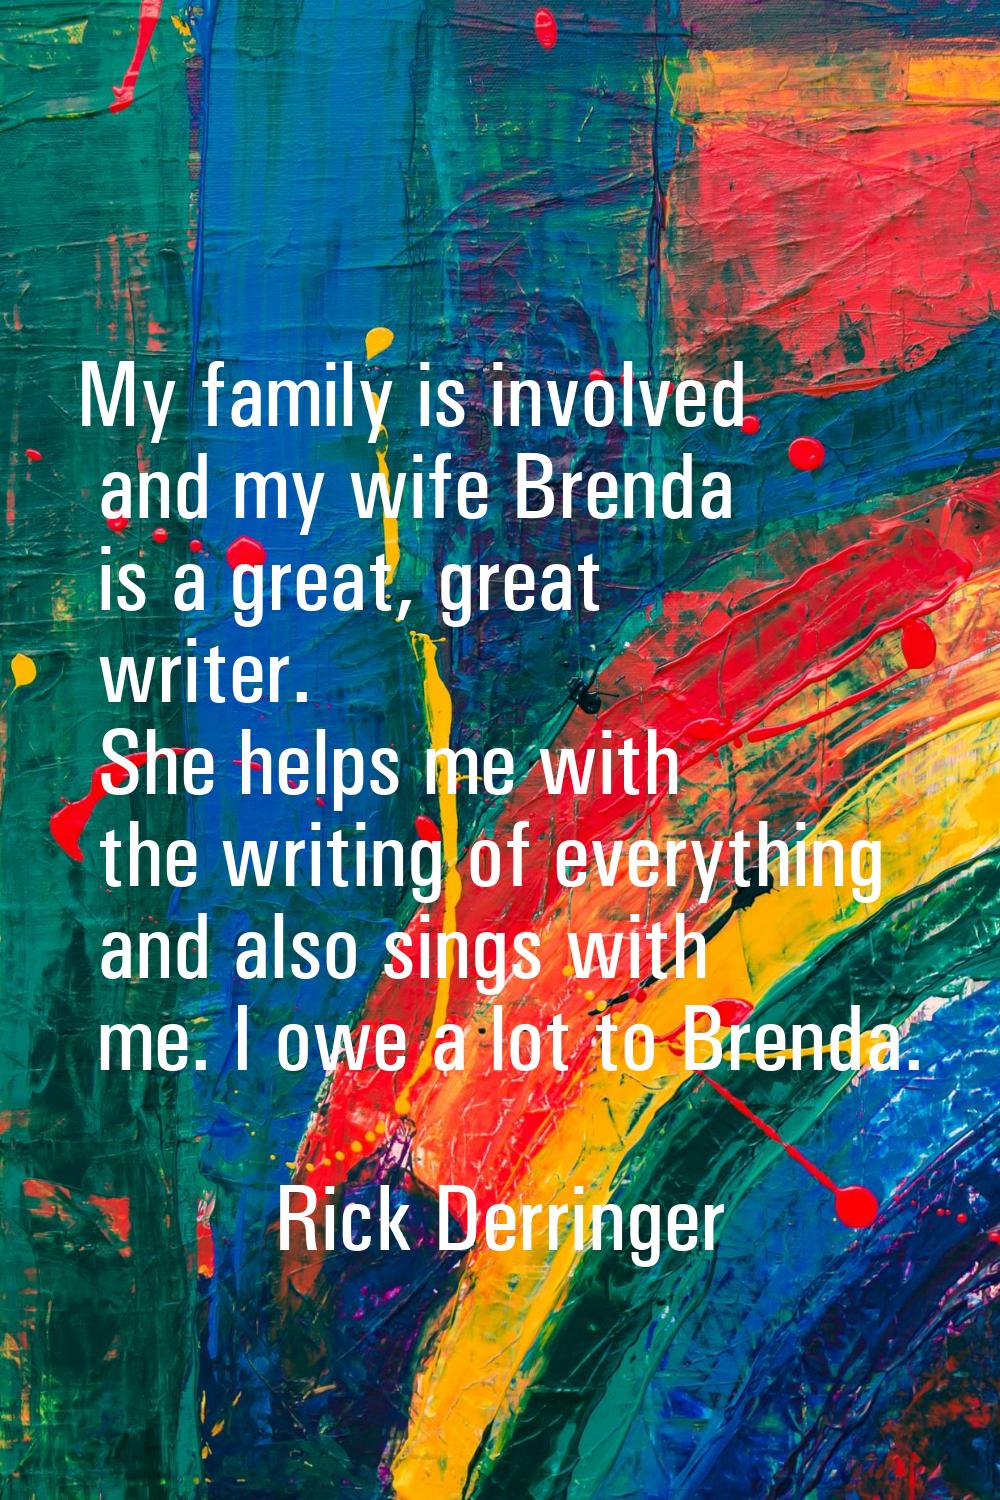 My family is involved and my wife Brenda is a great, great writer. She helps me with the writing of